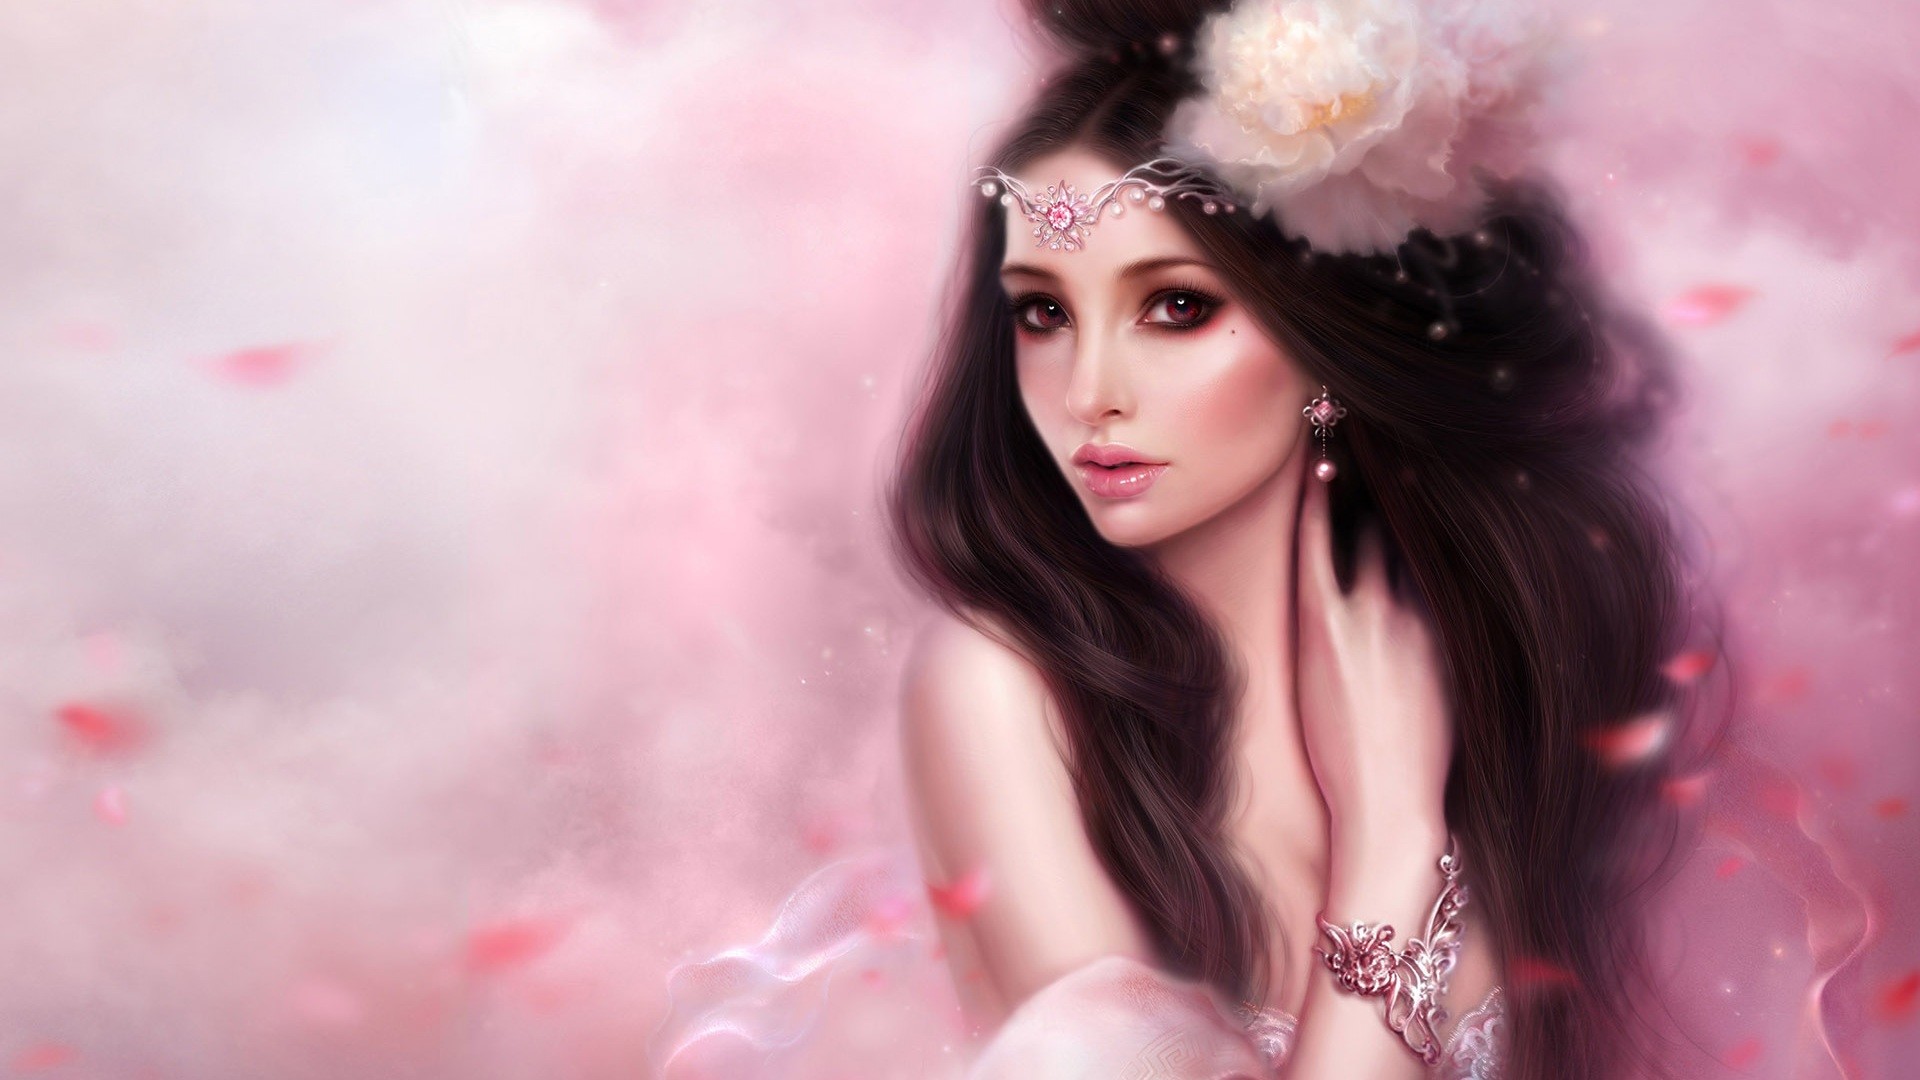 1920x1080 Fantasy Women Wallpapers - HD Wallpapers Backgrounds of Your Choice